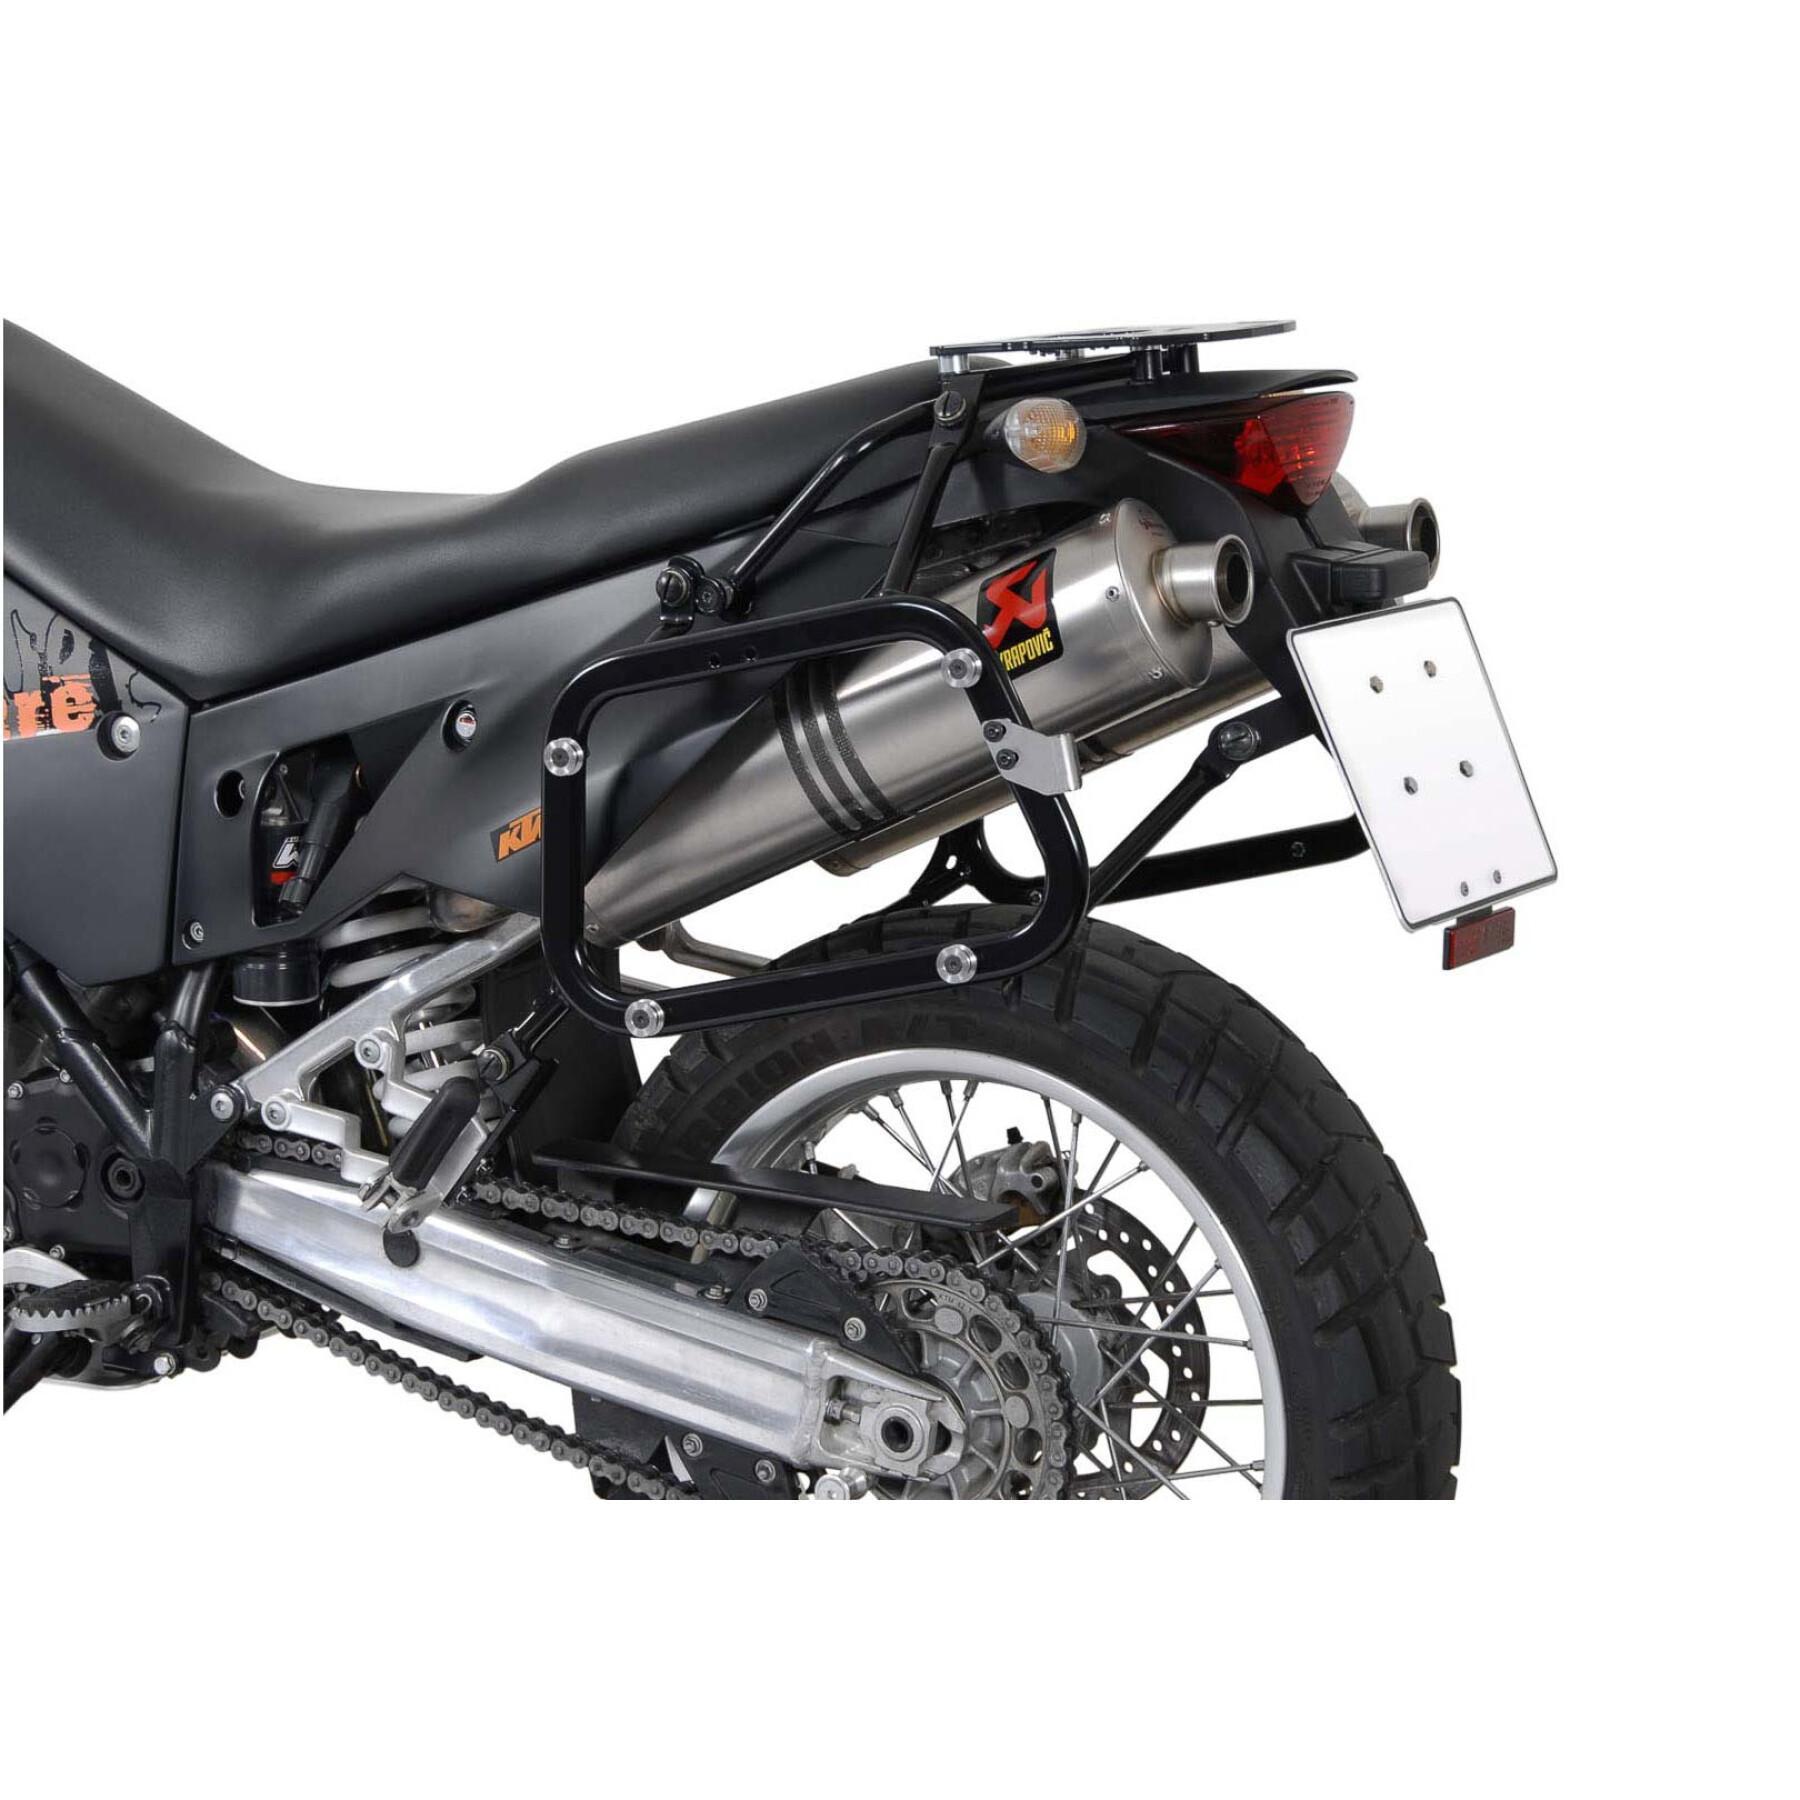 Motorcycle side case support Sw-Motech Evo. Ktm Lc8 950 / 990 Adventure